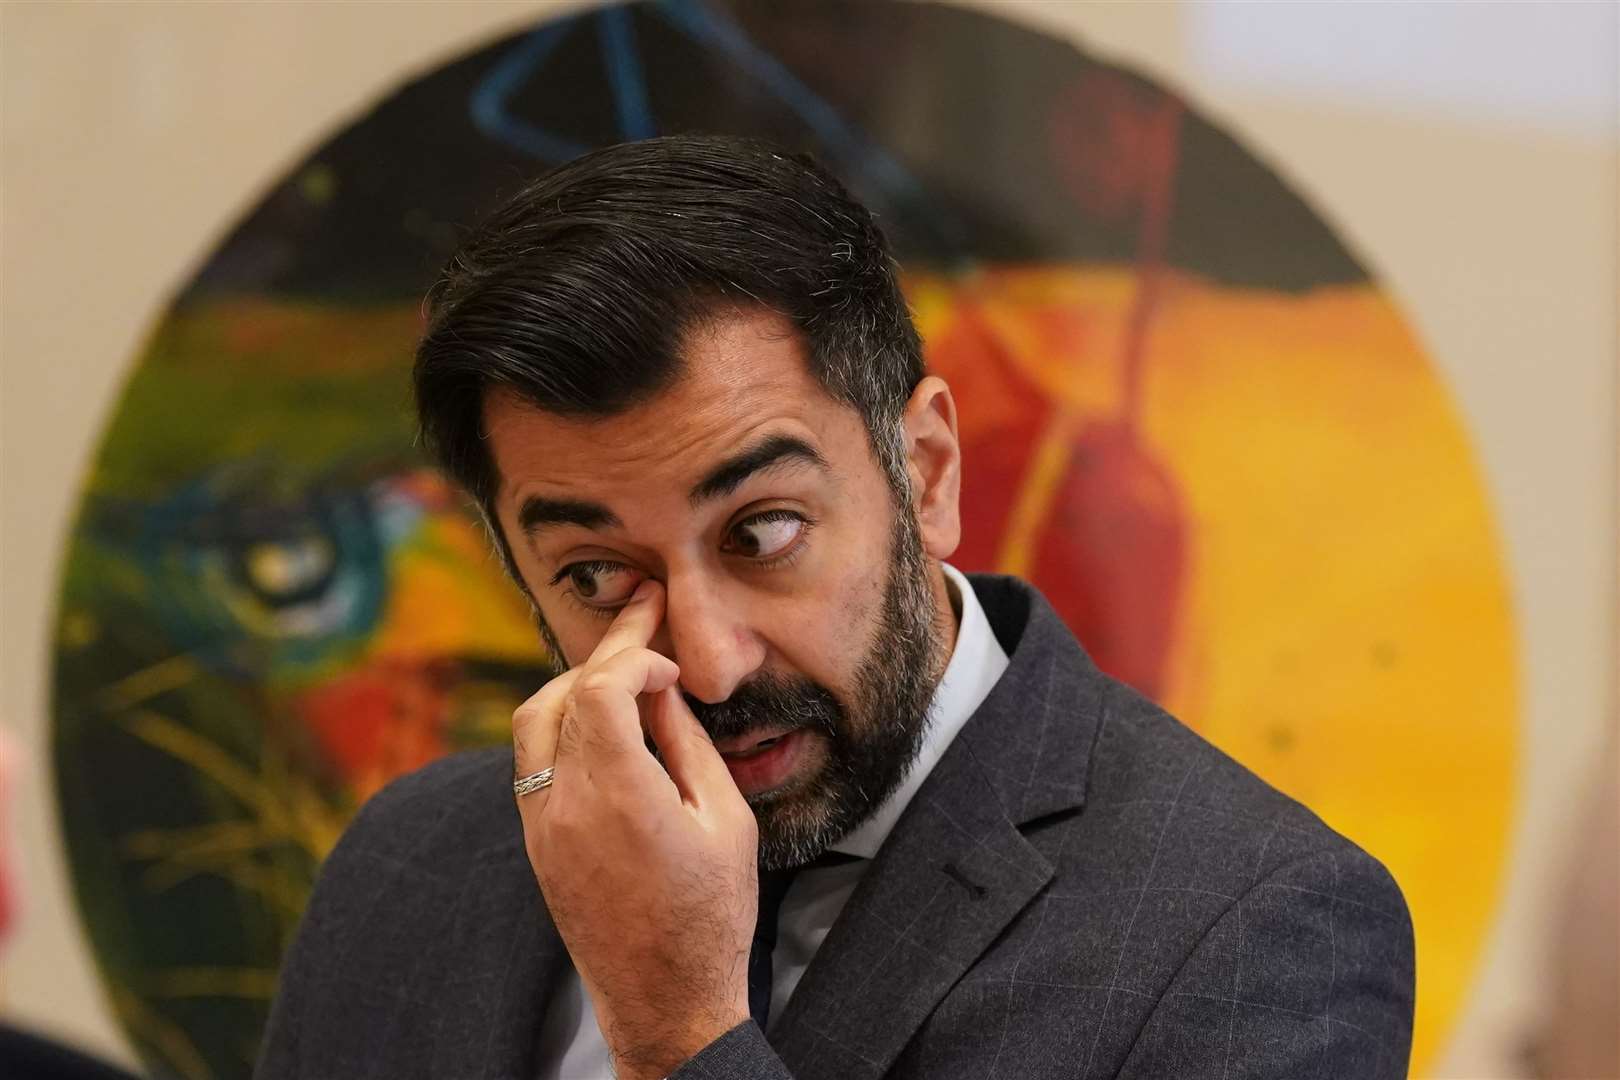 Humza Yousaf has described the announcement of the new oil and gas licences as ‘wrong’ (Andrew Milligan/PA)